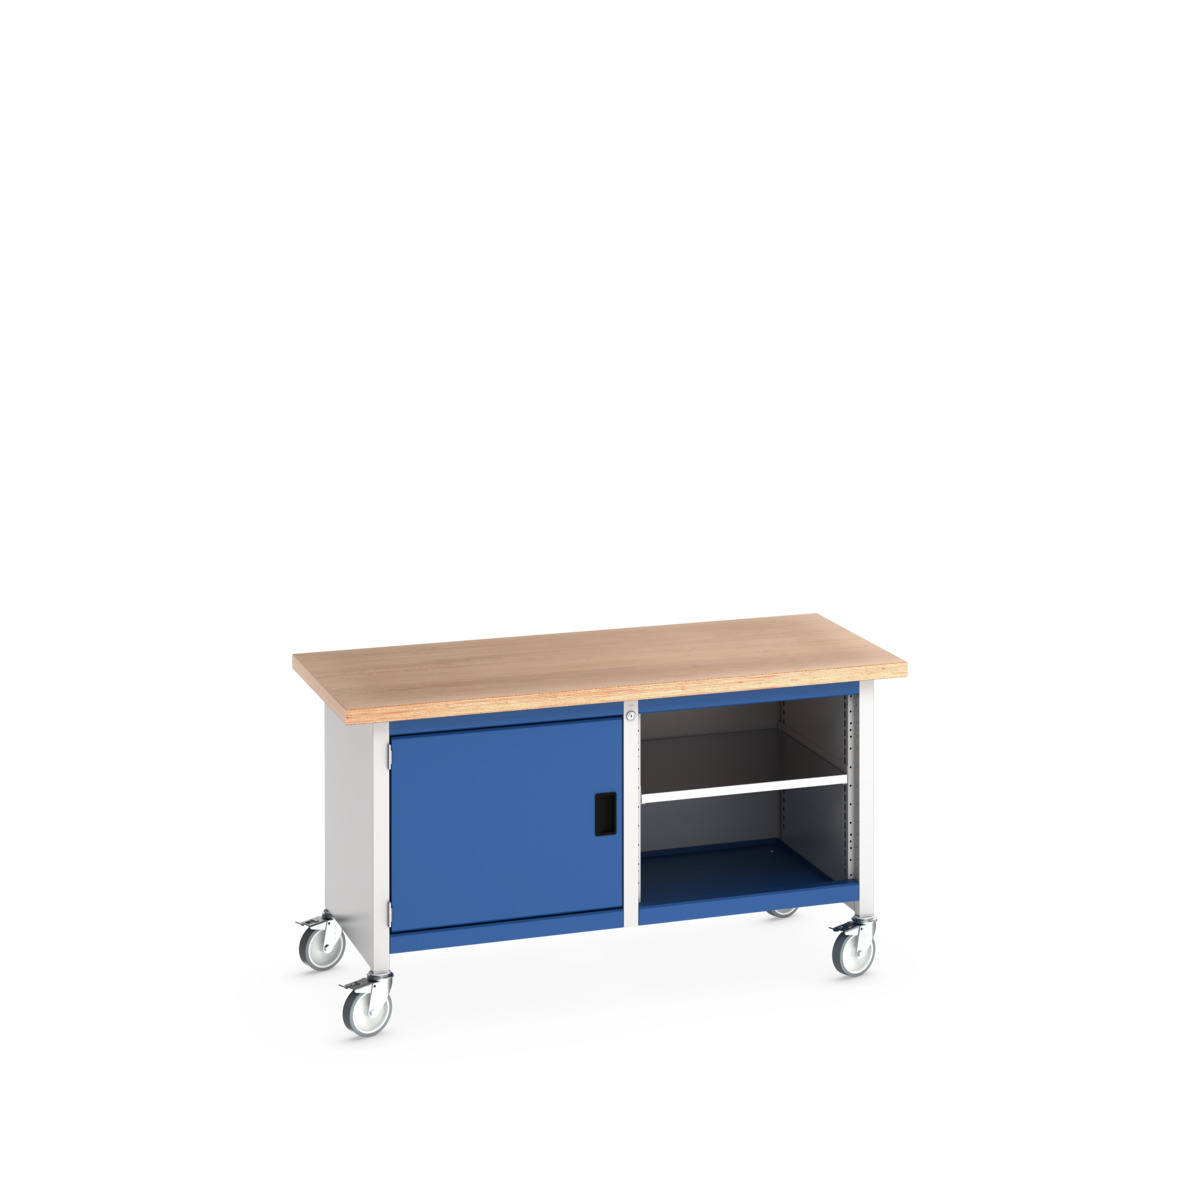 41002094.11V - cubio mobile storage bench (mpx)